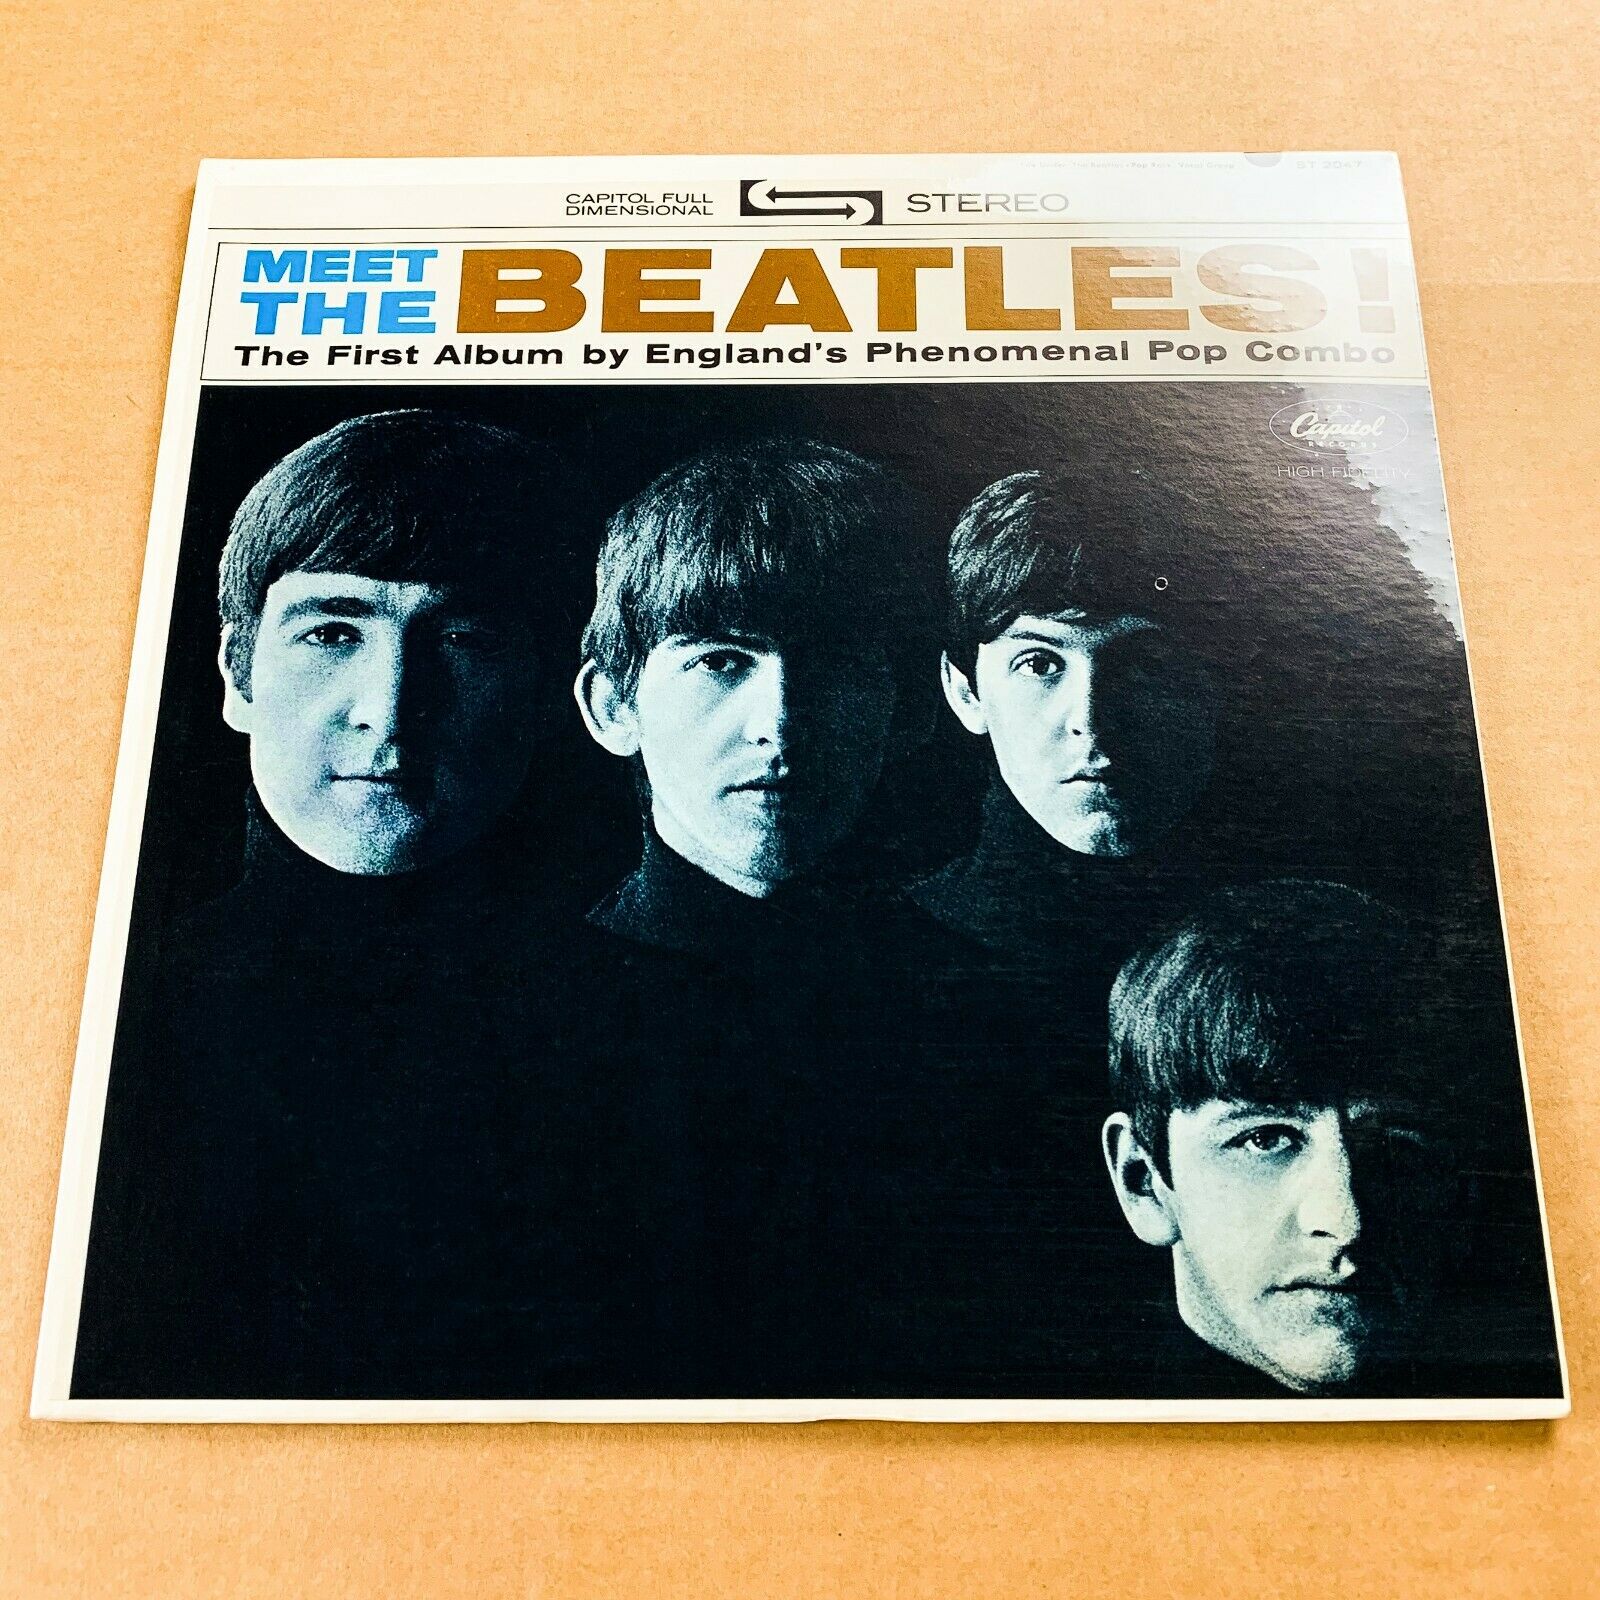 Pic 1 THE BEATLES MEET THE BEATLES  US ORIG'64 CAPITOL ST-2047 STEREO 1ST PRESS SEALED